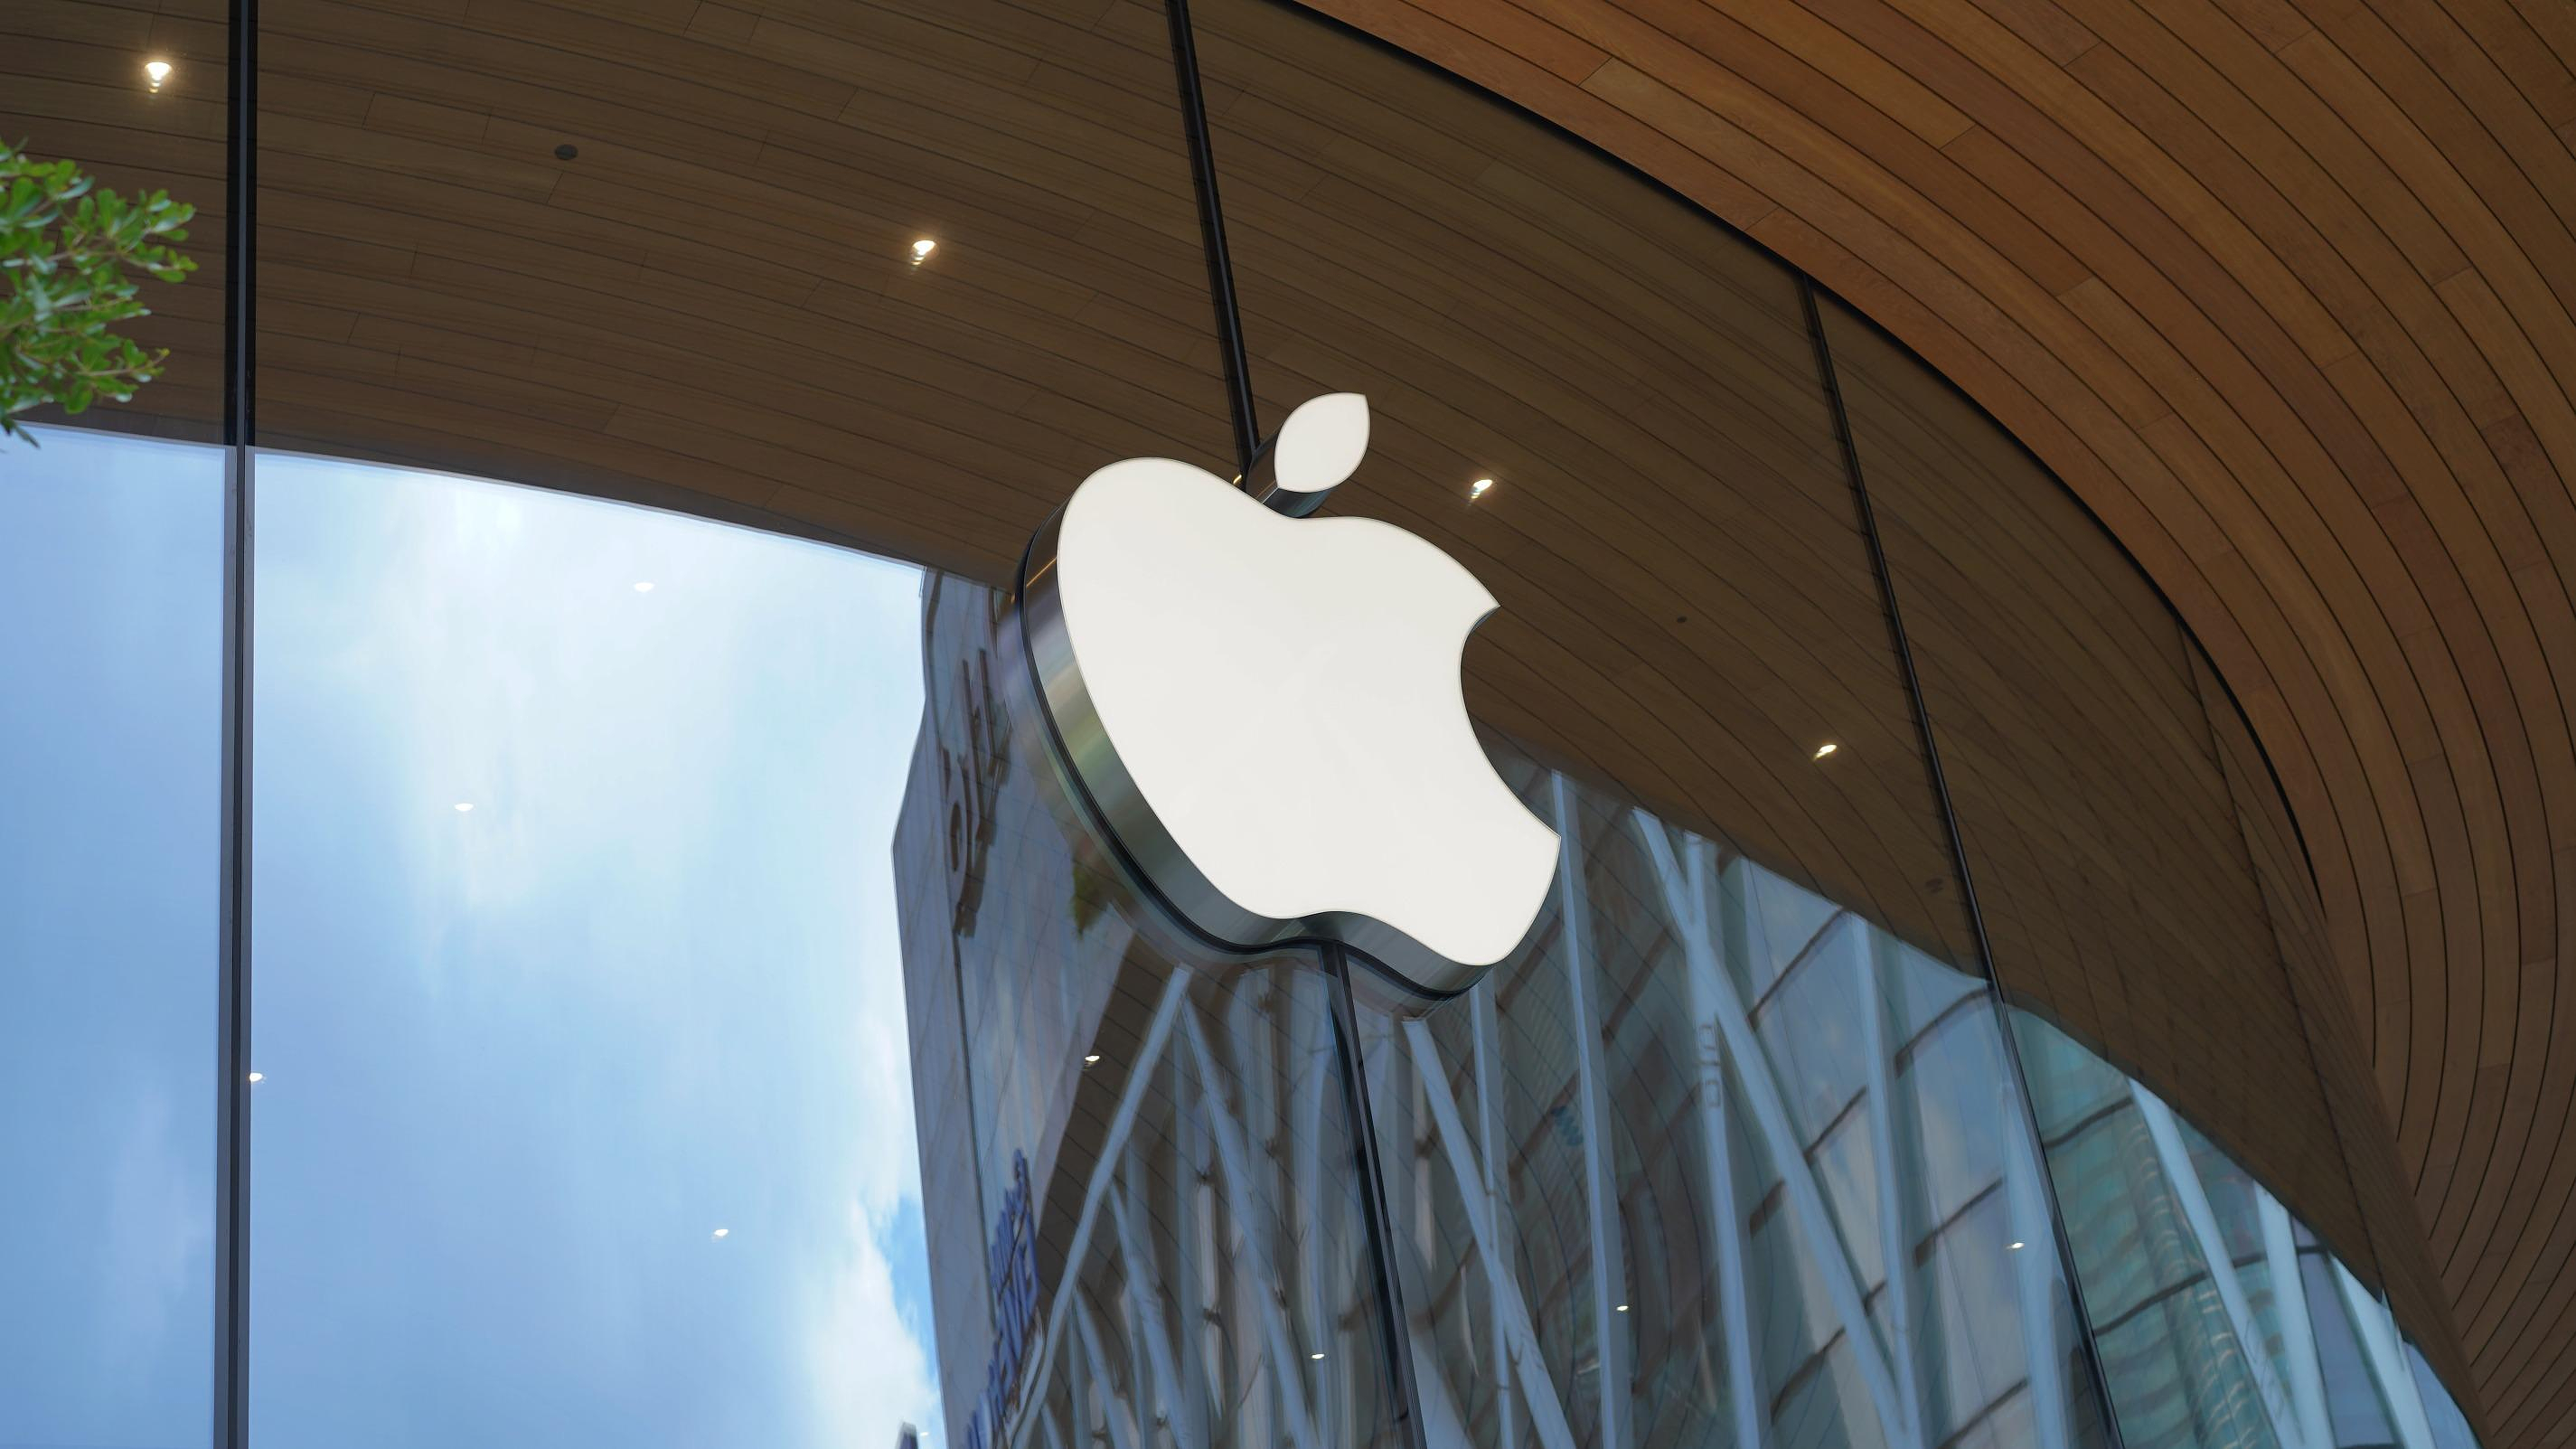 Apple once again becomes the most valuable brand in the world, dethroning Amazon